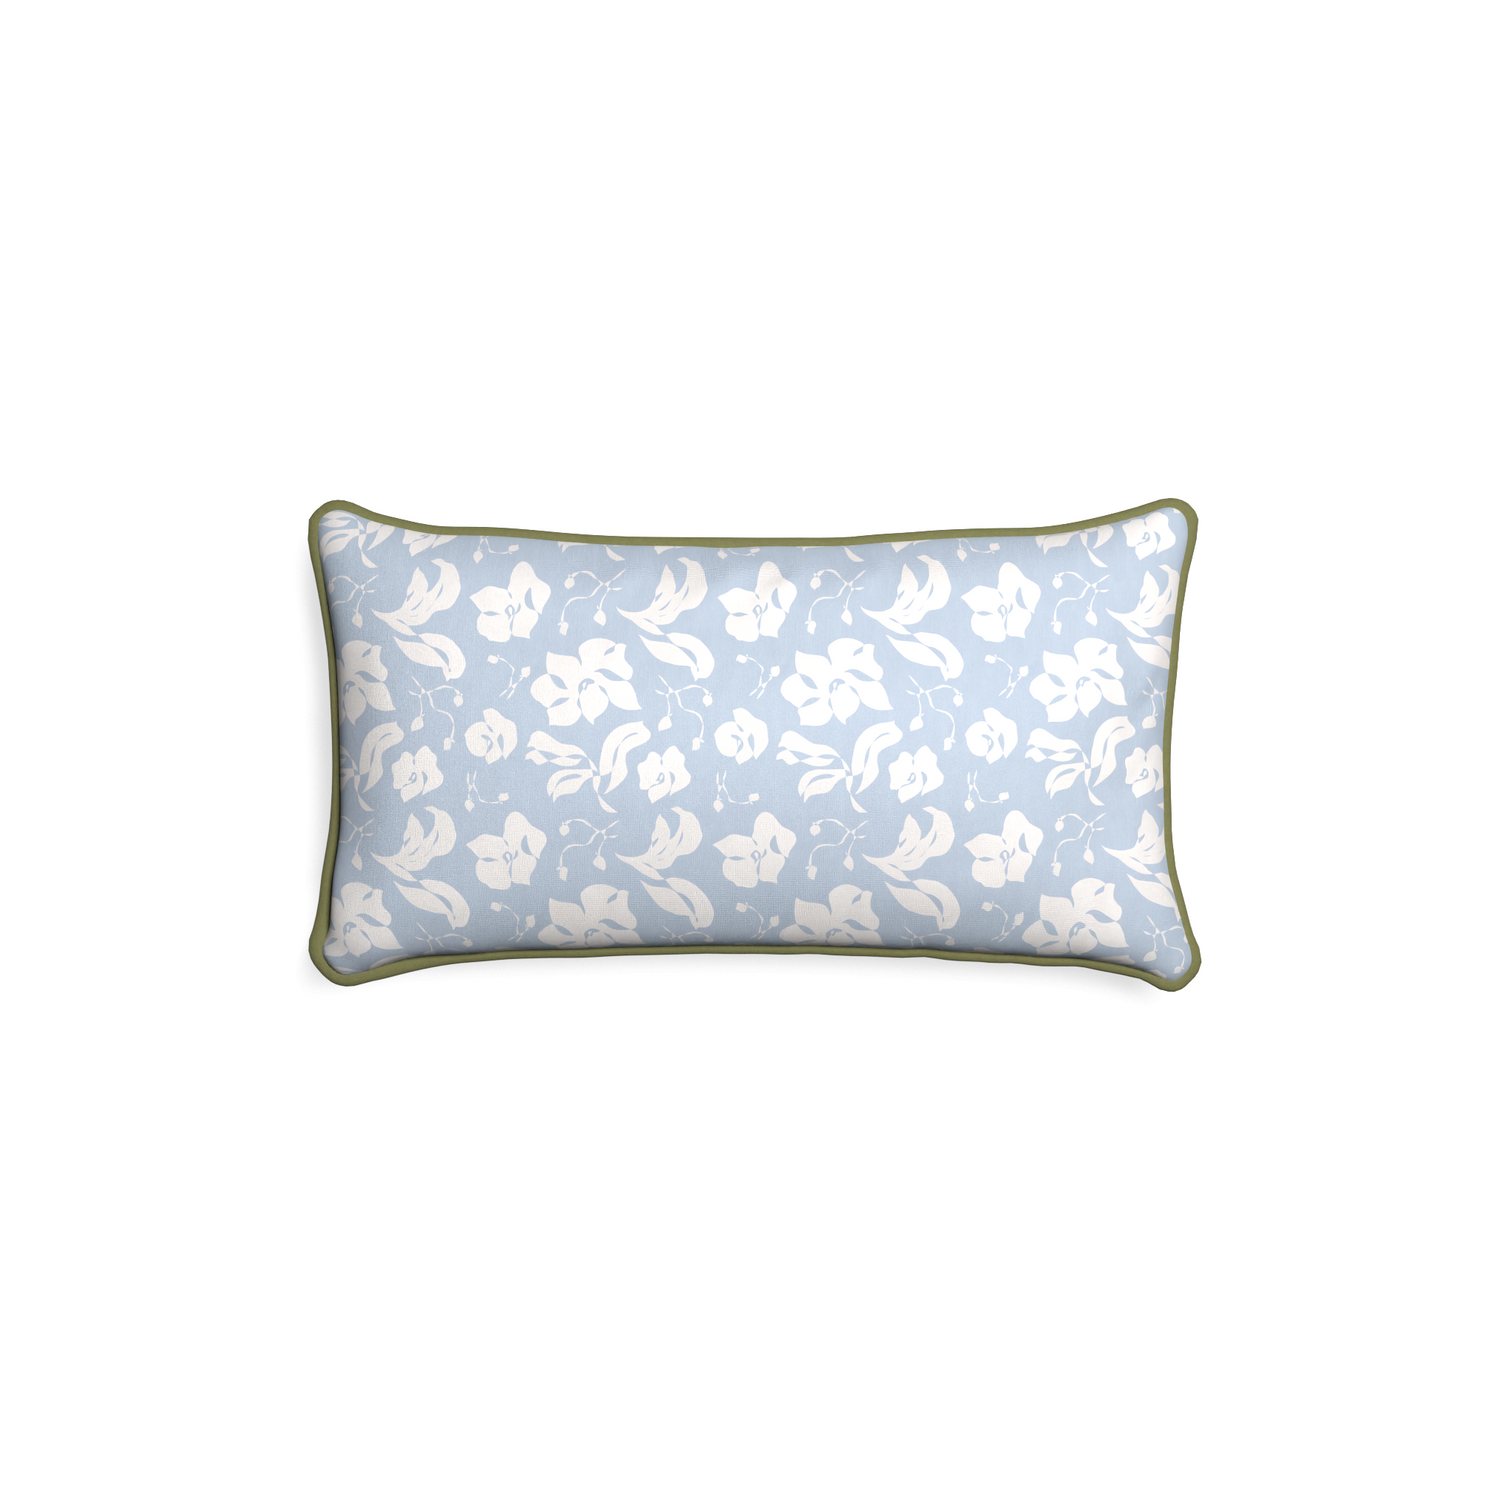 rectangle cornflower blue floral pillow with moss green piping